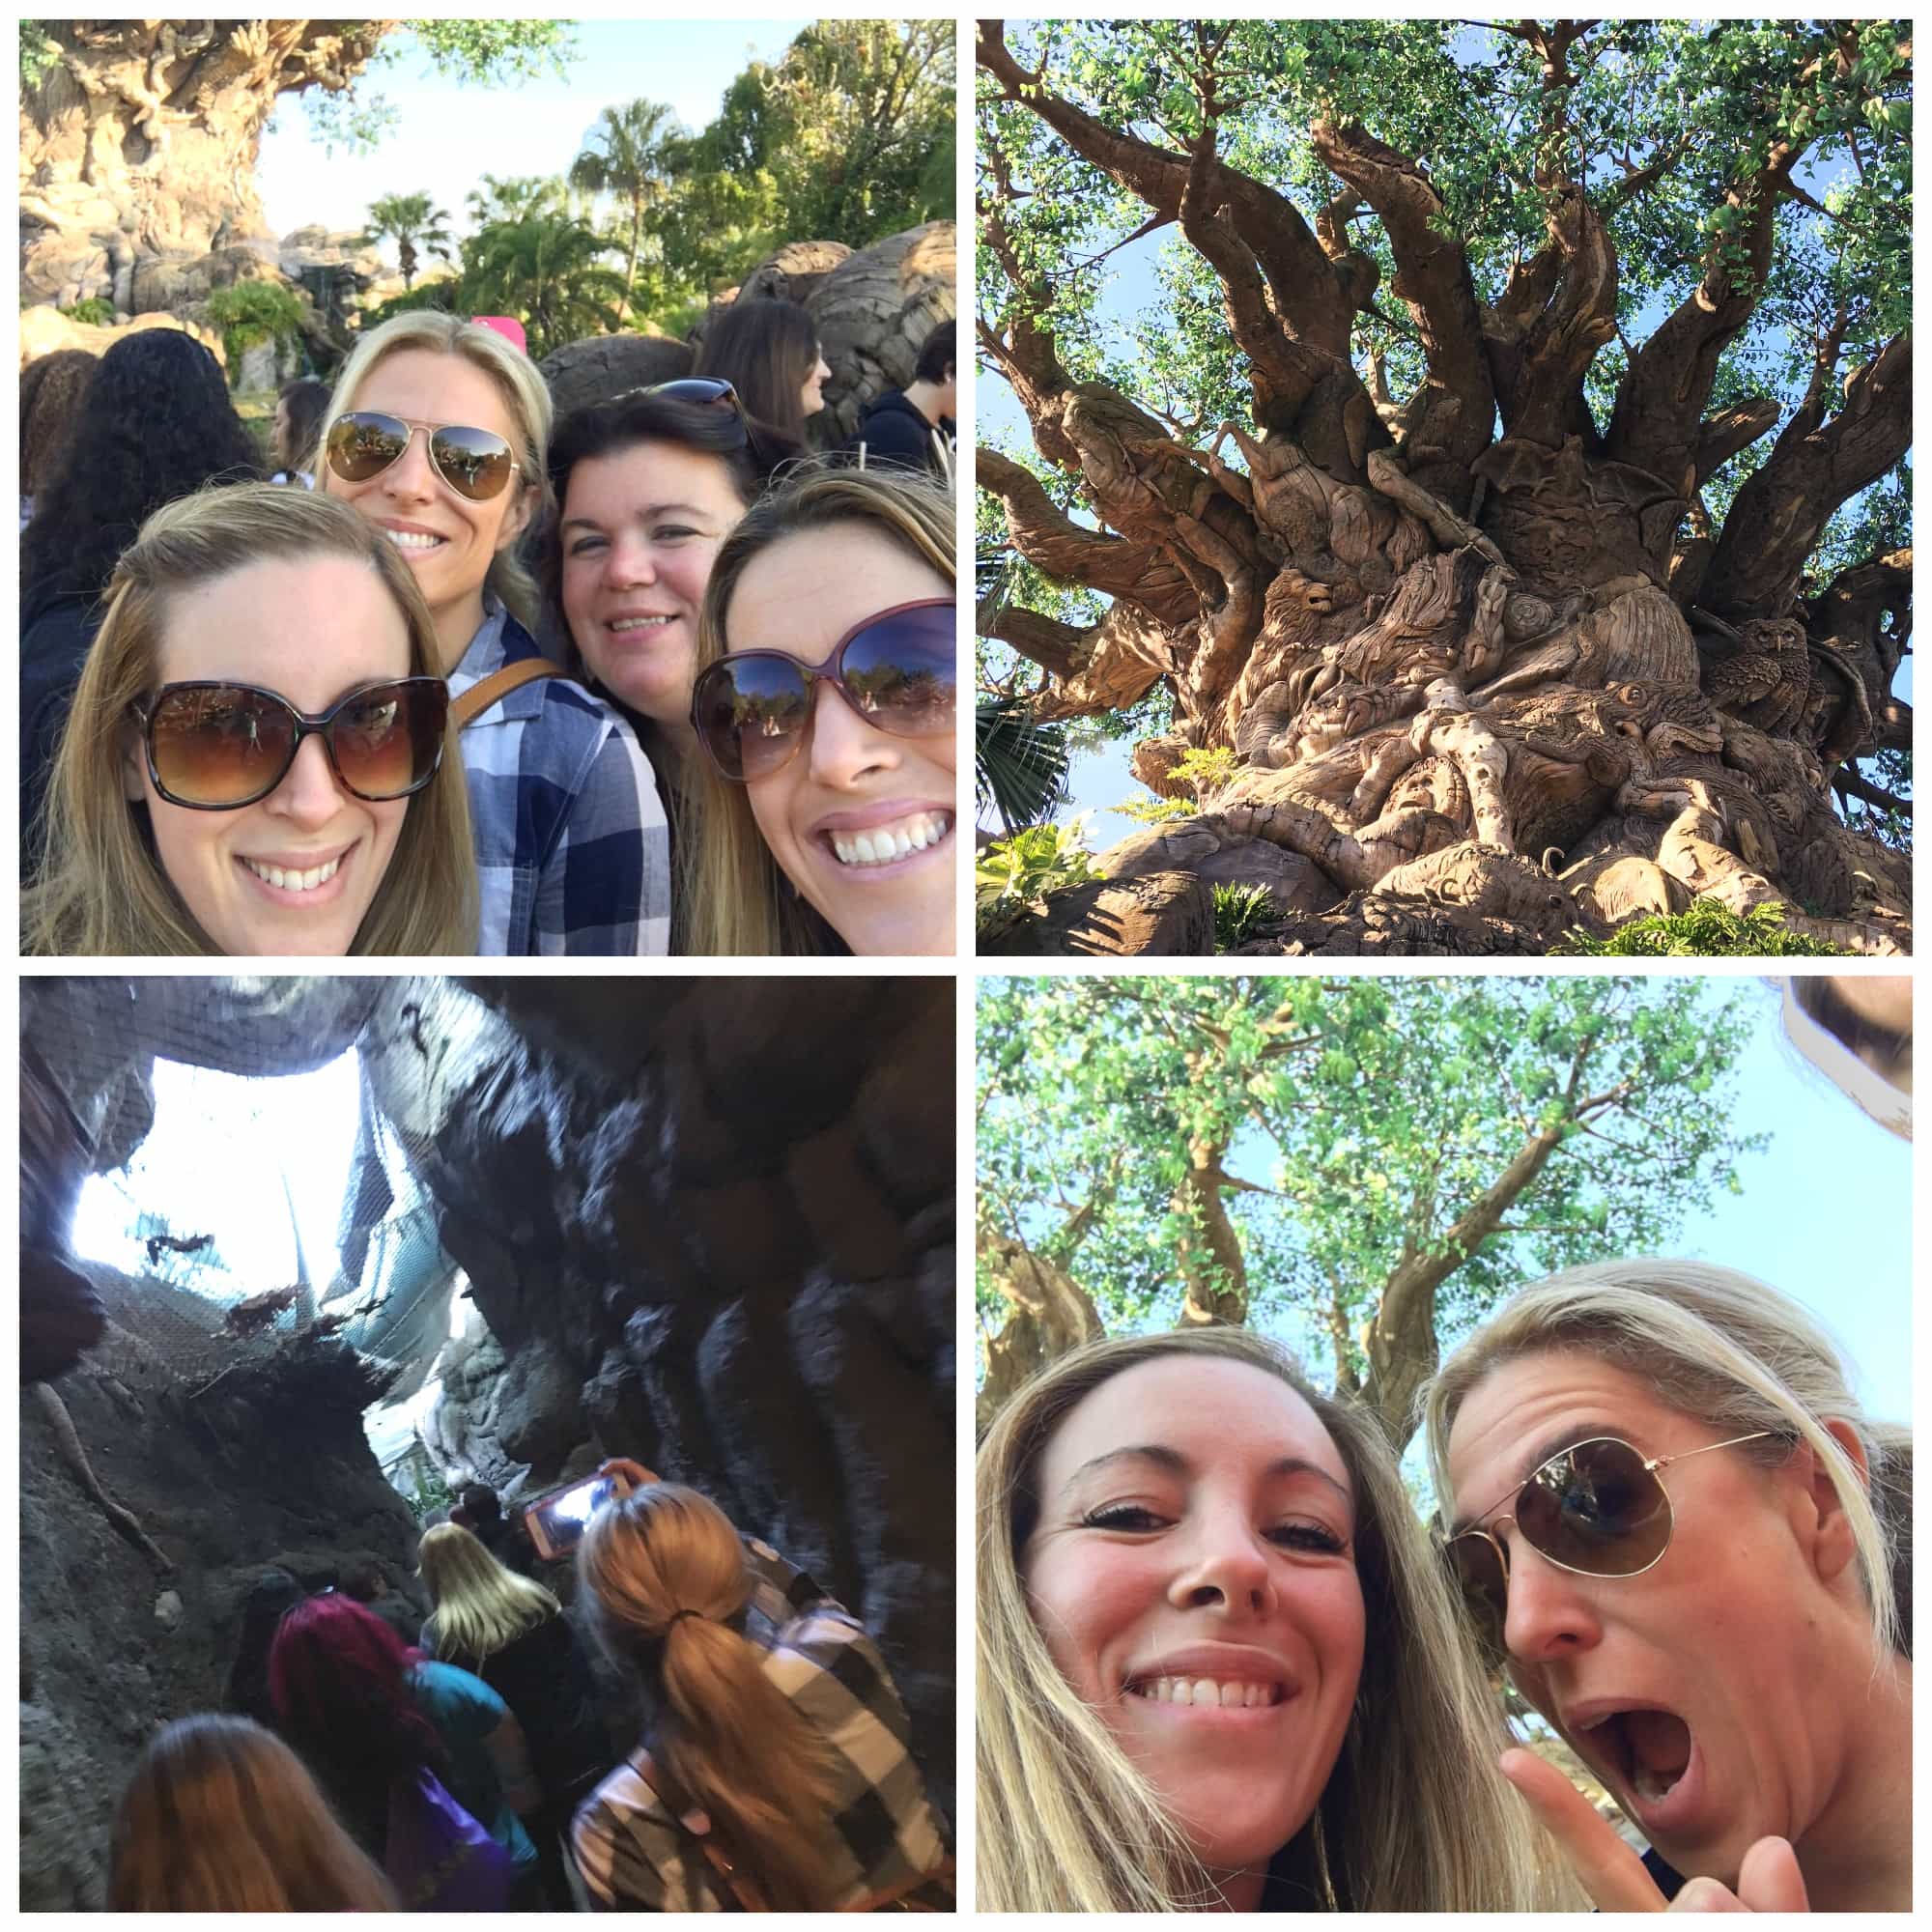 Have A Wild Time At Animal Kingdom With The Family #ZooTopiaEvent